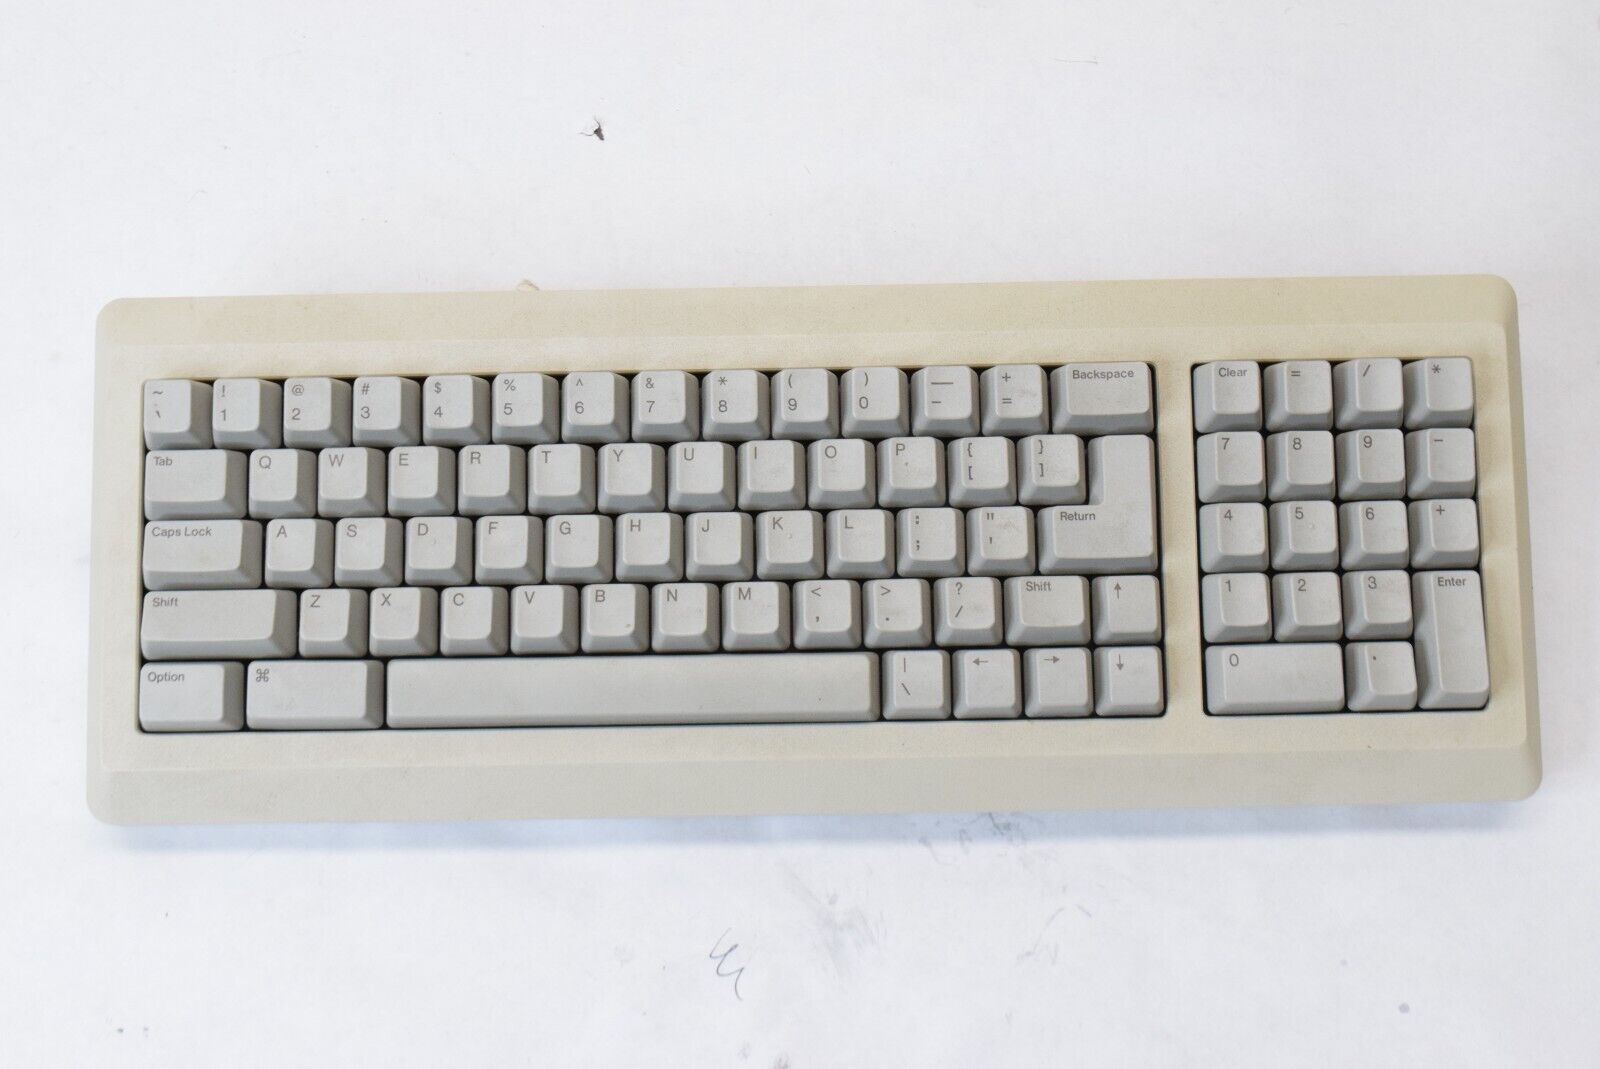 Apple M0110A Keyboard for Macintosh 128k 512k Plus - FULLY TESTED